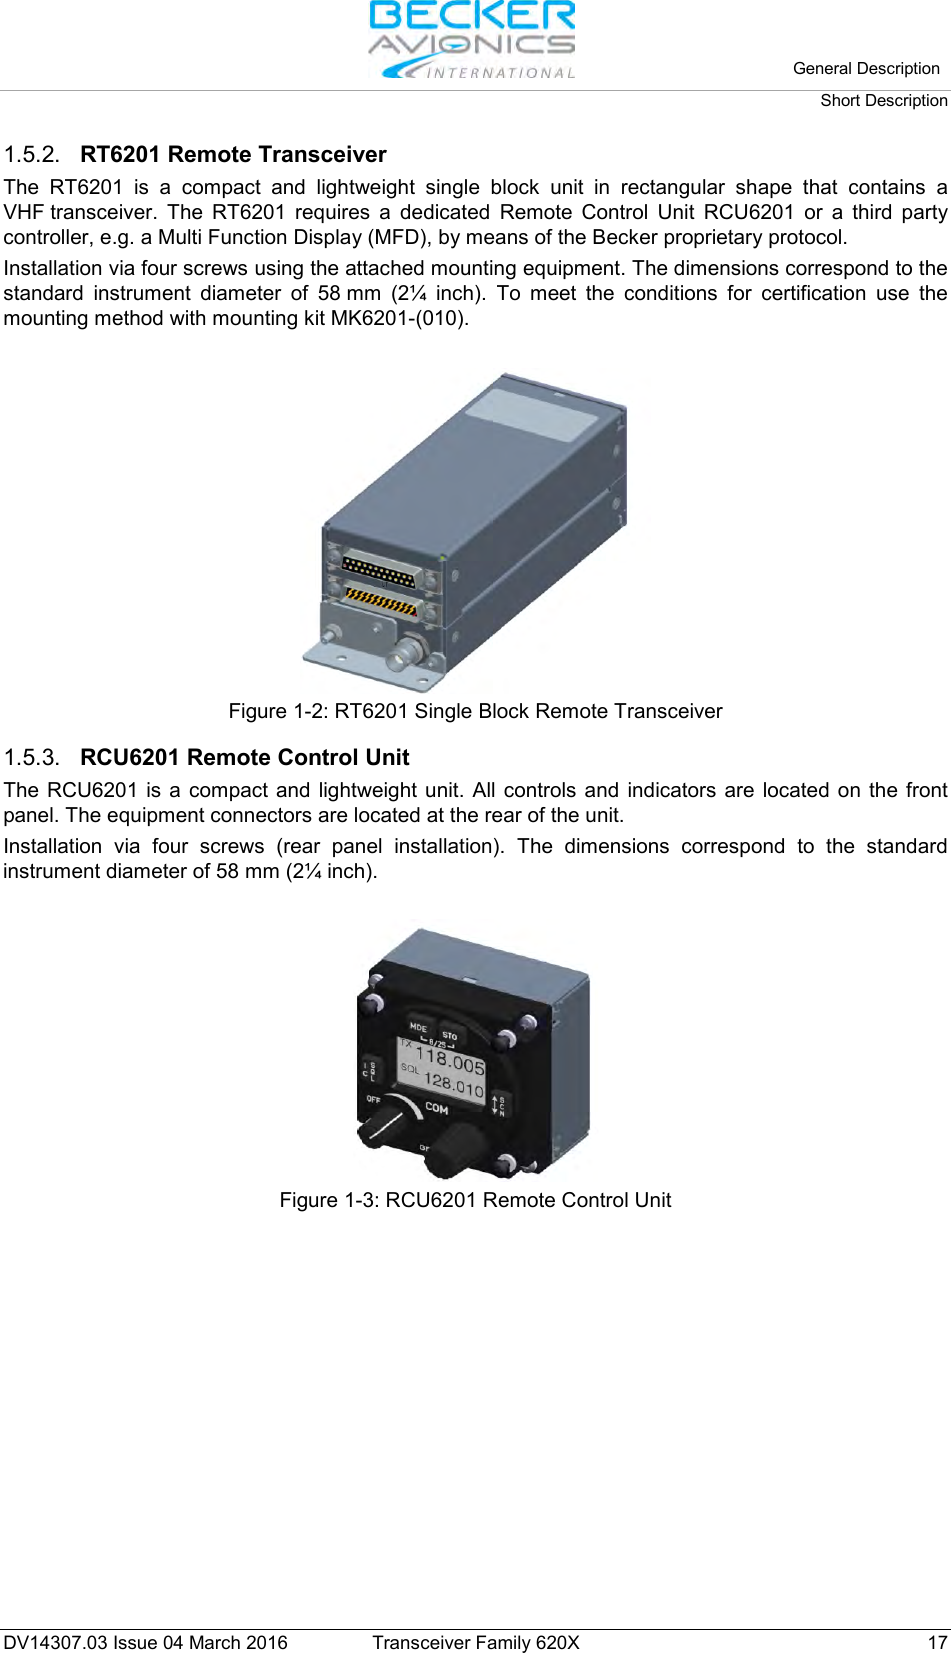   General Description Short Description  DV14307.03 Issue 04 March 2016 Transceiver Family 620X 17 1.5.2. RT6201 Remote Transceiver The RT6201 is a compact and lightweight single block unit in rectangular shape that contains a VHF transceiver. The RT6201 requires a dedicated Remote Control Unit RCU6201 or a third party controller, e.g. a Multi Function Display (MFD), by means of the Becker proprietary protocol. Installation via four screws using the attached mounting equipment. The dimensions correspond to the standard instrument diameter of 58 mm (2¼ inch). To meet the conditions for certification use the mounting method with mounting kit MK6201-(010).   Figure 1-2: RT6201 Single Block Remote Transceiver  1.5.3. RCU6201 Remote Control Unit The RCU6201 is a compact and lightweight unit. All controls and indicators are located on the front panel. The equipment connectors are located at the rear of the unit.  Installation  via four screws (rear panel installation). The dimensions correspond to the standard instrument diameter of 58 mm (2¼ inch).   Figure 1-3: RCU6201 Remote Control Unit 